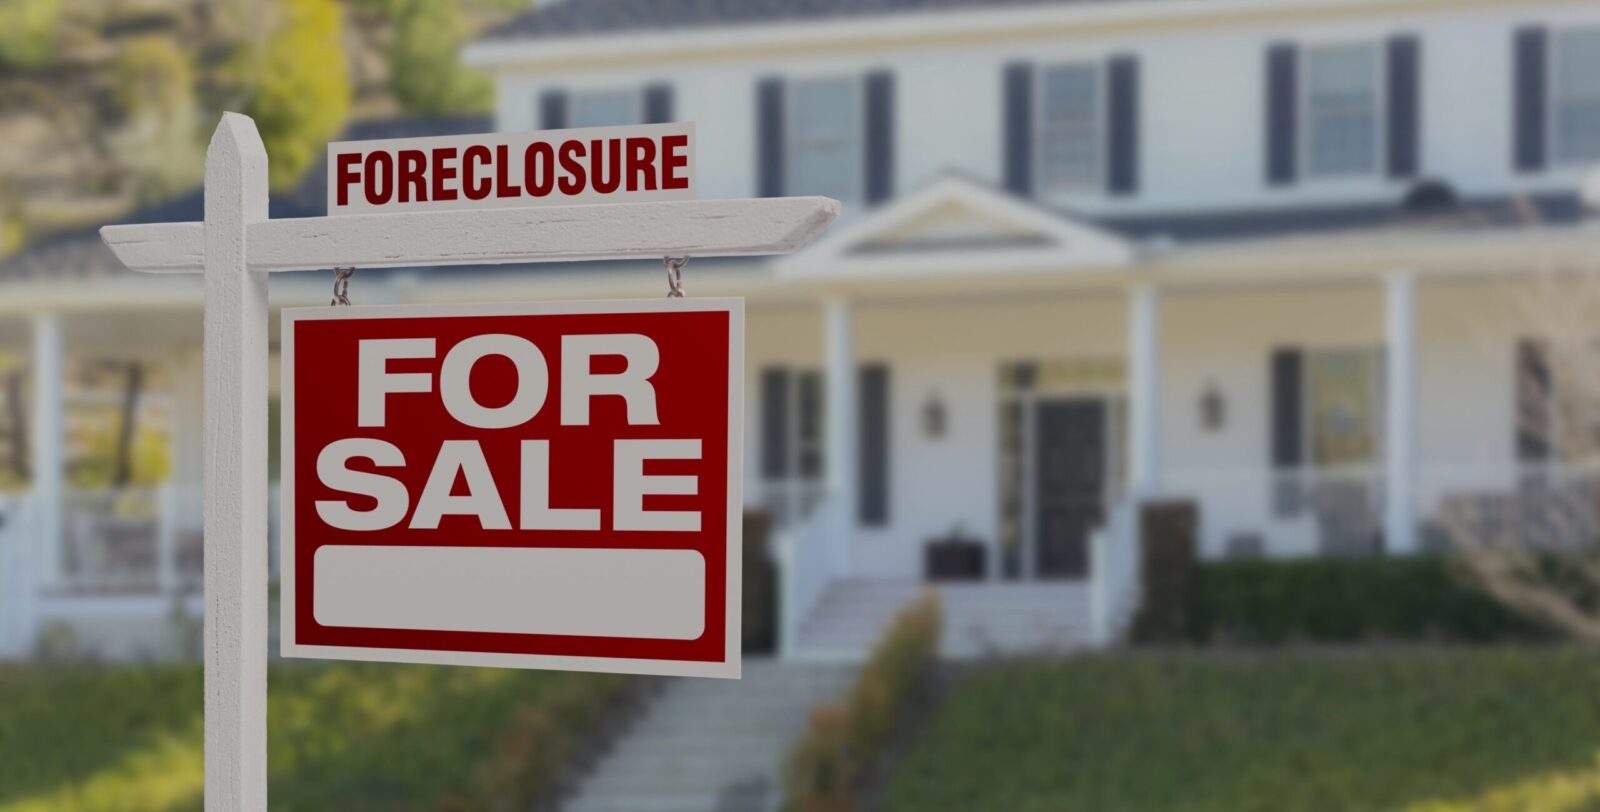 Foreclosed home in need of cleanout services